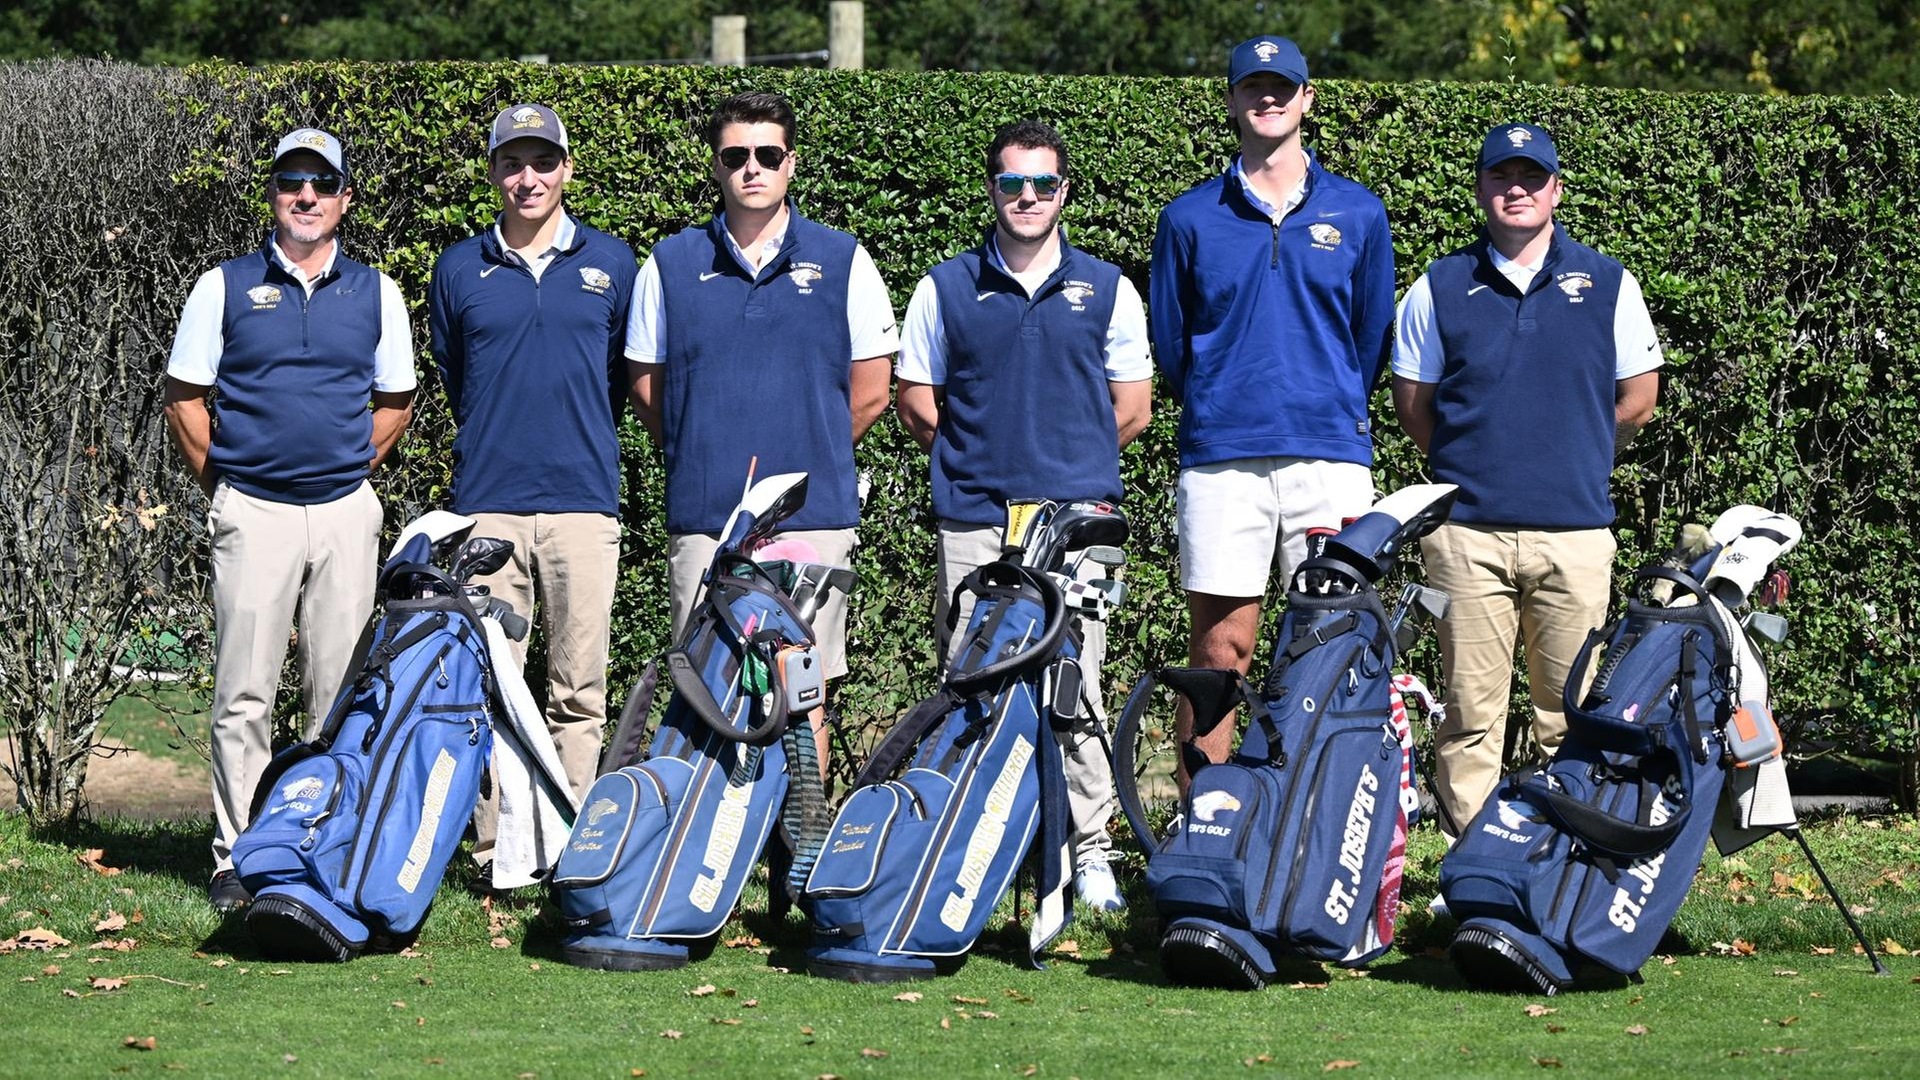 Golf Wraps Up Spring Season at Mt. St. Mary Invitational